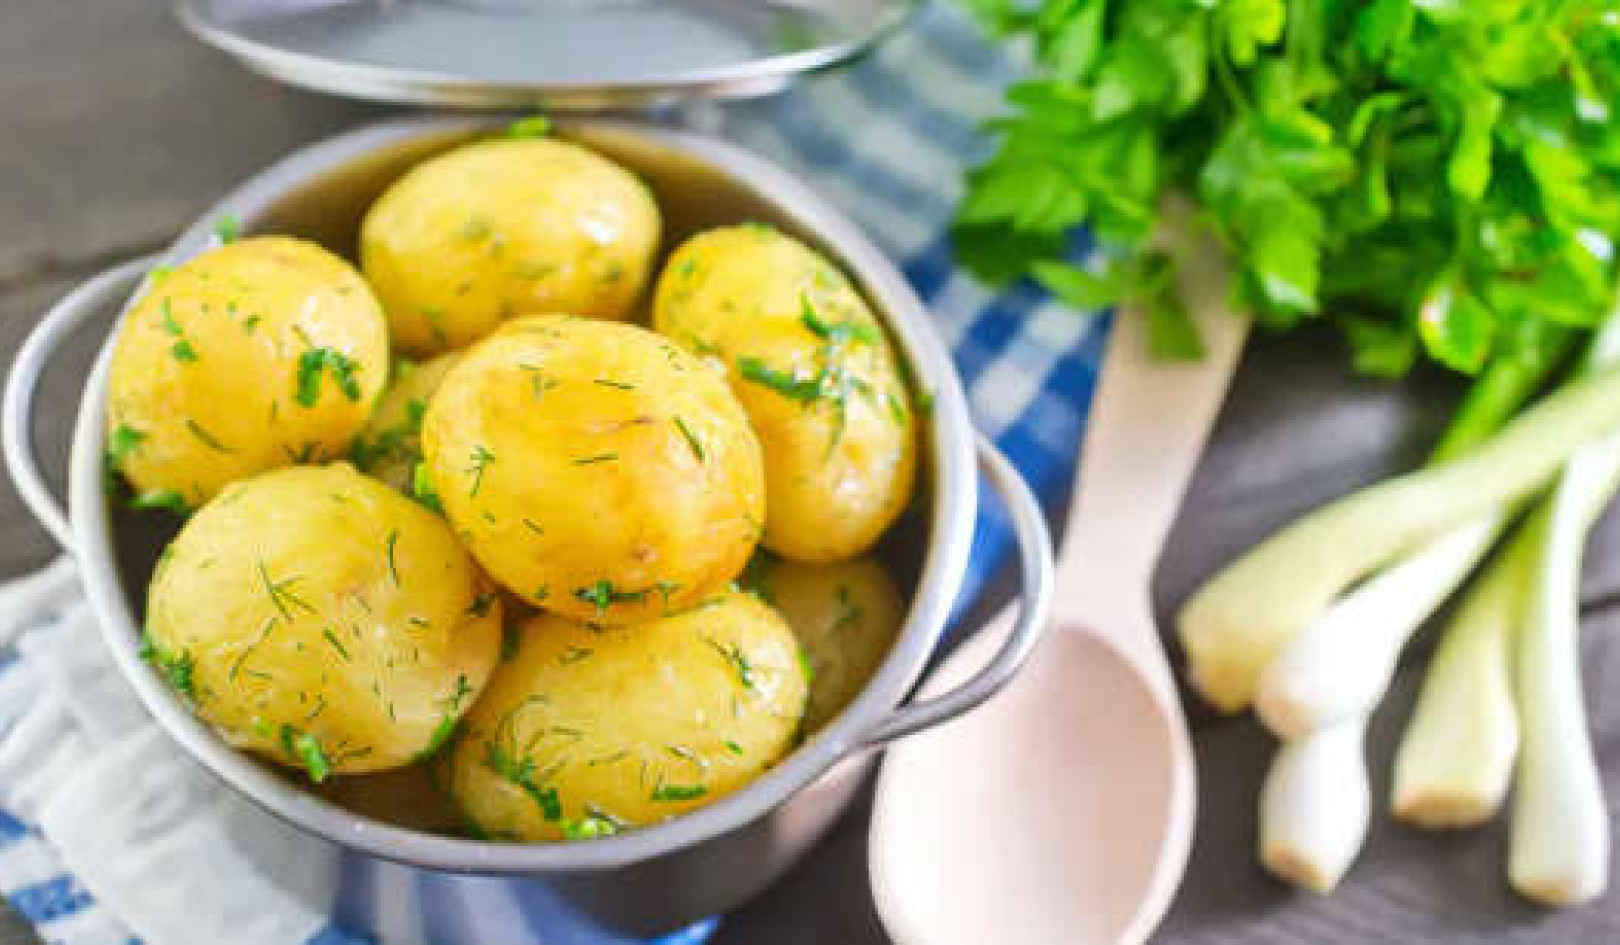 6 Reasons Why Potatoes Are Good For You